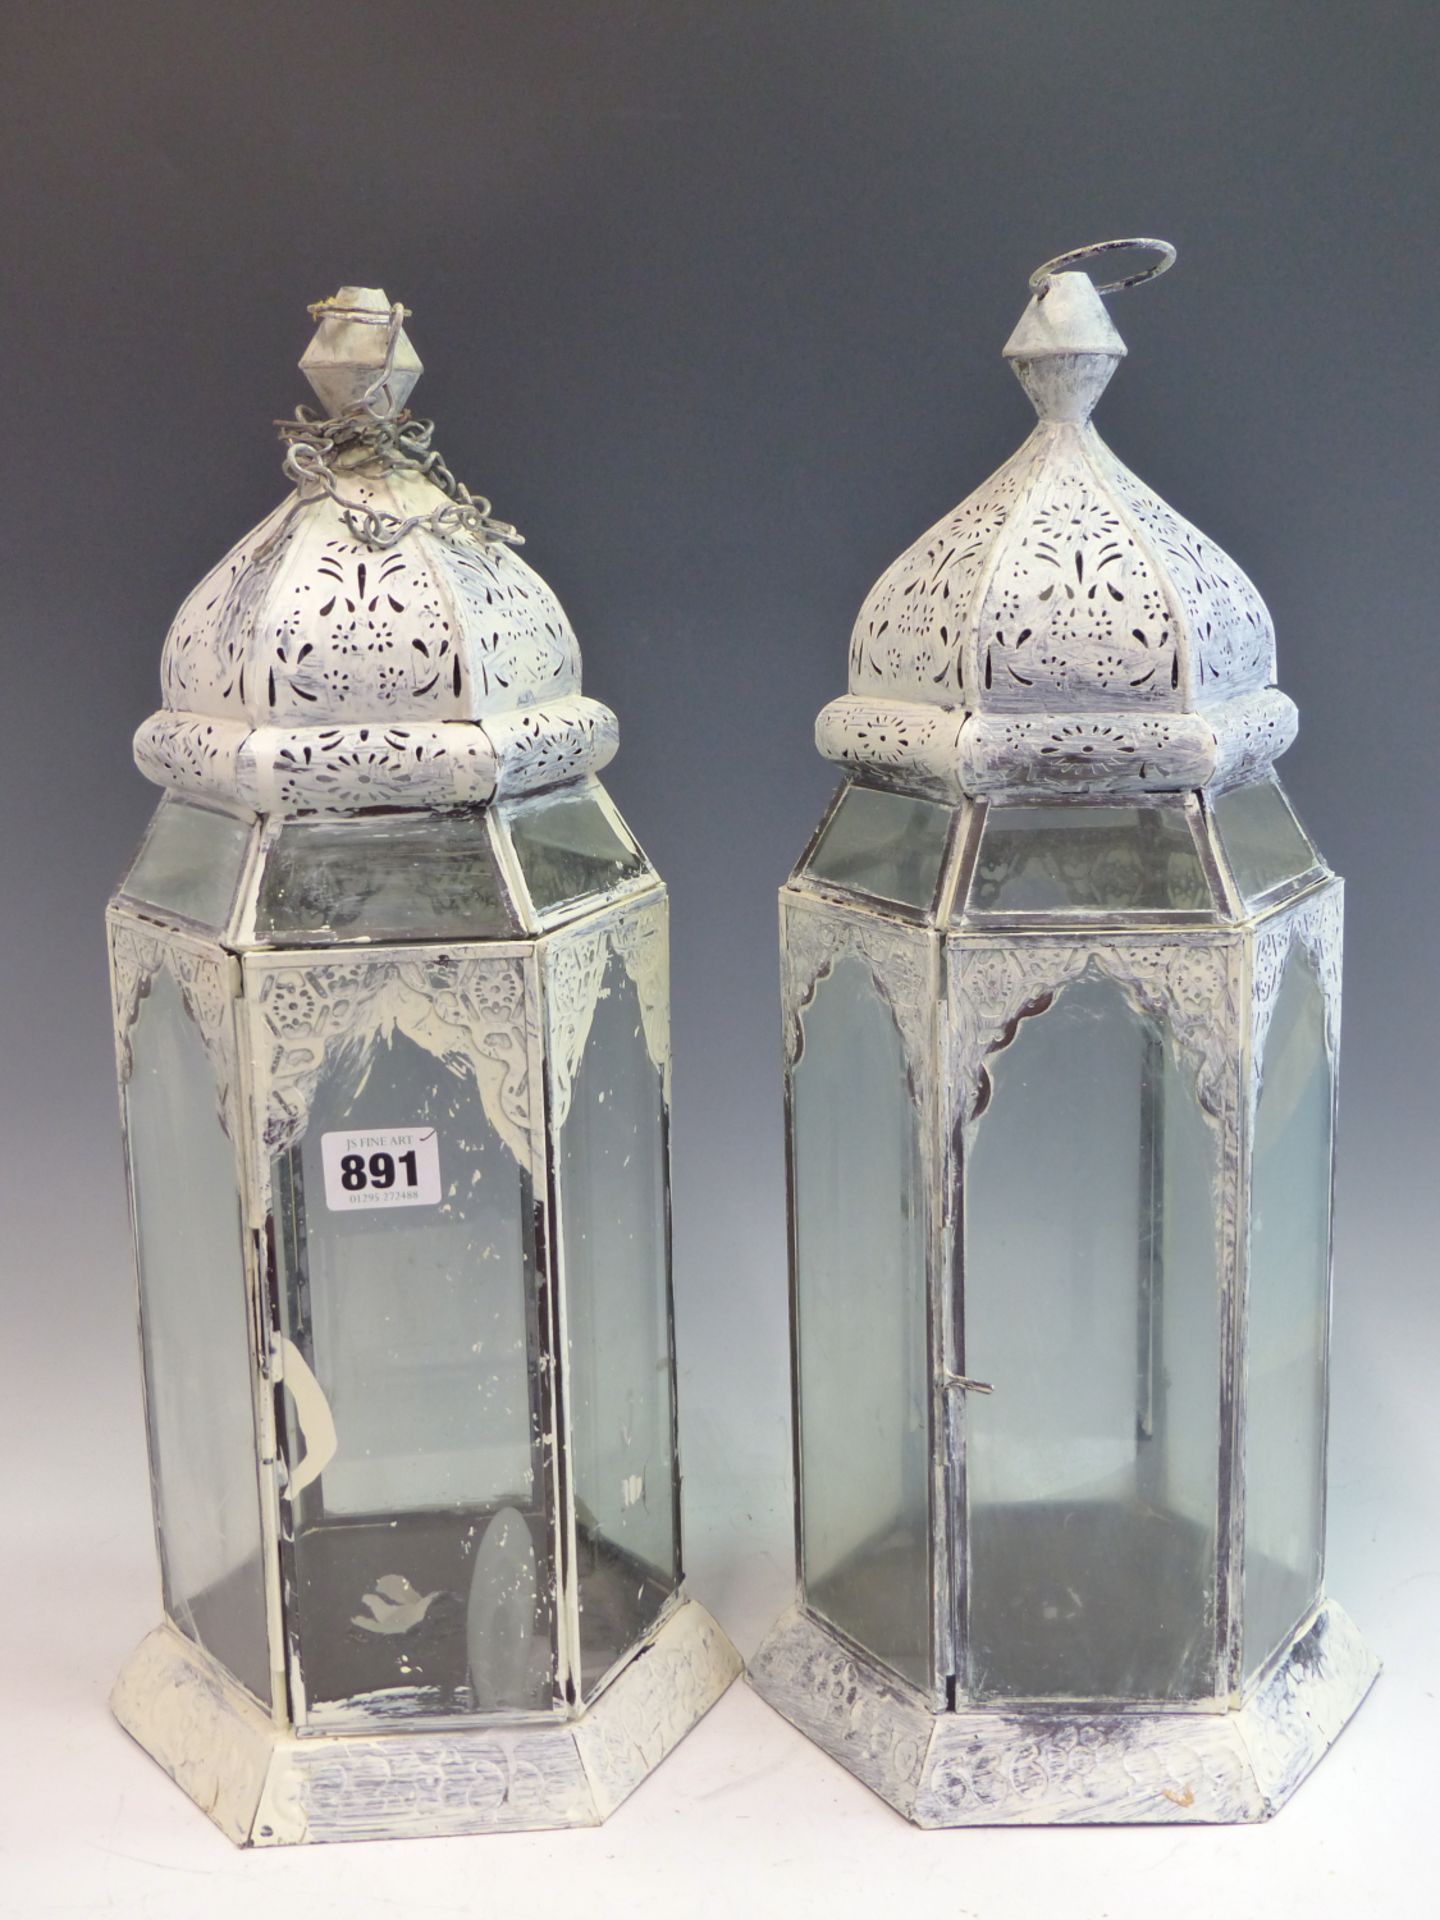 A PAIR OF PAINTED HEXAGONAL PIERCED METAL AND GLASS HANGING CANDLE LANTERNS.